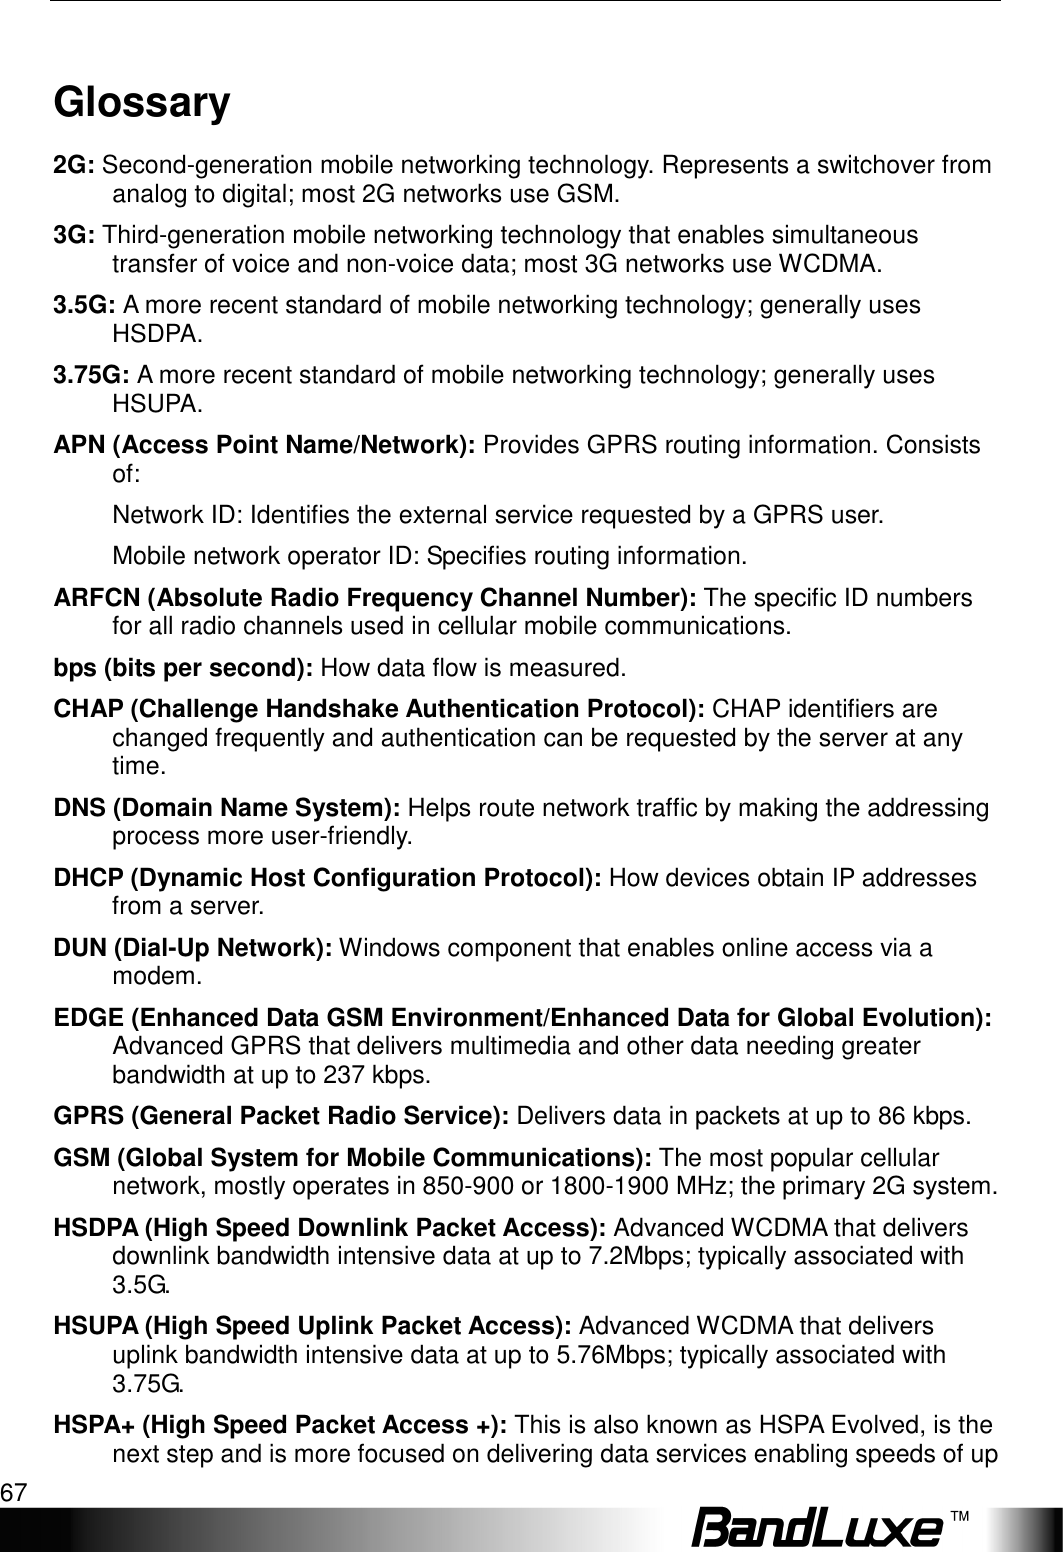   Appendix C: Important Safety Information and Glossary 67 Glossary 2G: Second-generation mobile networking technology. Represents a switchover from analog to digital; most 2G networks use GSM. 3G: Third-generation mobile networking technology that enables simultaneous transfer of voice and non-voice data; most 3G networks use WCDMA. 3.5G: A more recent standard of mobile networking technology; generally uses HSDPA. 3.75G: A more recent standard of mobile networking technology; generally uses HSUPA. APN (Access Point Name/Network): Provides GPRS routing information. Consists of: Network ID: Identiﬁes the external service requested by a GPRS user.   Mobile network operator ID: Speciﬁes routing information. ARFCN (Absolute Radio Frequency Channel Number): The speciﬁc ID numbers for all radio channels used in cellular mobile communications. bps (bits per second): How data ﬂow is measured. CHAP (Challenge Handshake Authentication Protocol): CHAP identifiers are changed frequently and authentication can be requested by the server at any time.   DNS (Domain Name System): Helps route network trafﬁc by making the addressing process more user-friendly. DHCP (Dynamic Host Conﬁguration Protocol): How devices obtain IP addresses from a server. DUN (Dial-Up Network): Windows component that enables online access via a modem. EDGE (Enhanced Data GSM Environment/Enhanced Data for Global Evolution): Advanced GPRS that delivers multimedia and other data needing greater bandwidth at up to 237 kbps. GPRS (General Packet Radio Service): Delivers data in packets at up to 86 kbps. GSM (Global System for Mobile Communications): The most popular cellular network, mostly operates in 850-900 or 1800-1900 MHz; the primary 2G system. HSDPA (High Speed Downlink Packet Access): Advanced WCDMA that delivers downlink bandwidth intensive data at up to 7.2Mbps; typically associated with 3.5G. HSUPA (High Speed Uplink Packet Access): Advanced WCDMA that delivers uplink bandwidth intensive data at up to 5.76Mbps; typically associated with 3.75G. HSPA+ (High Speed Packet Access +): This is also known as HSPA Evolved, is the next step and is more focused on delivering data services enabling speeds of up 